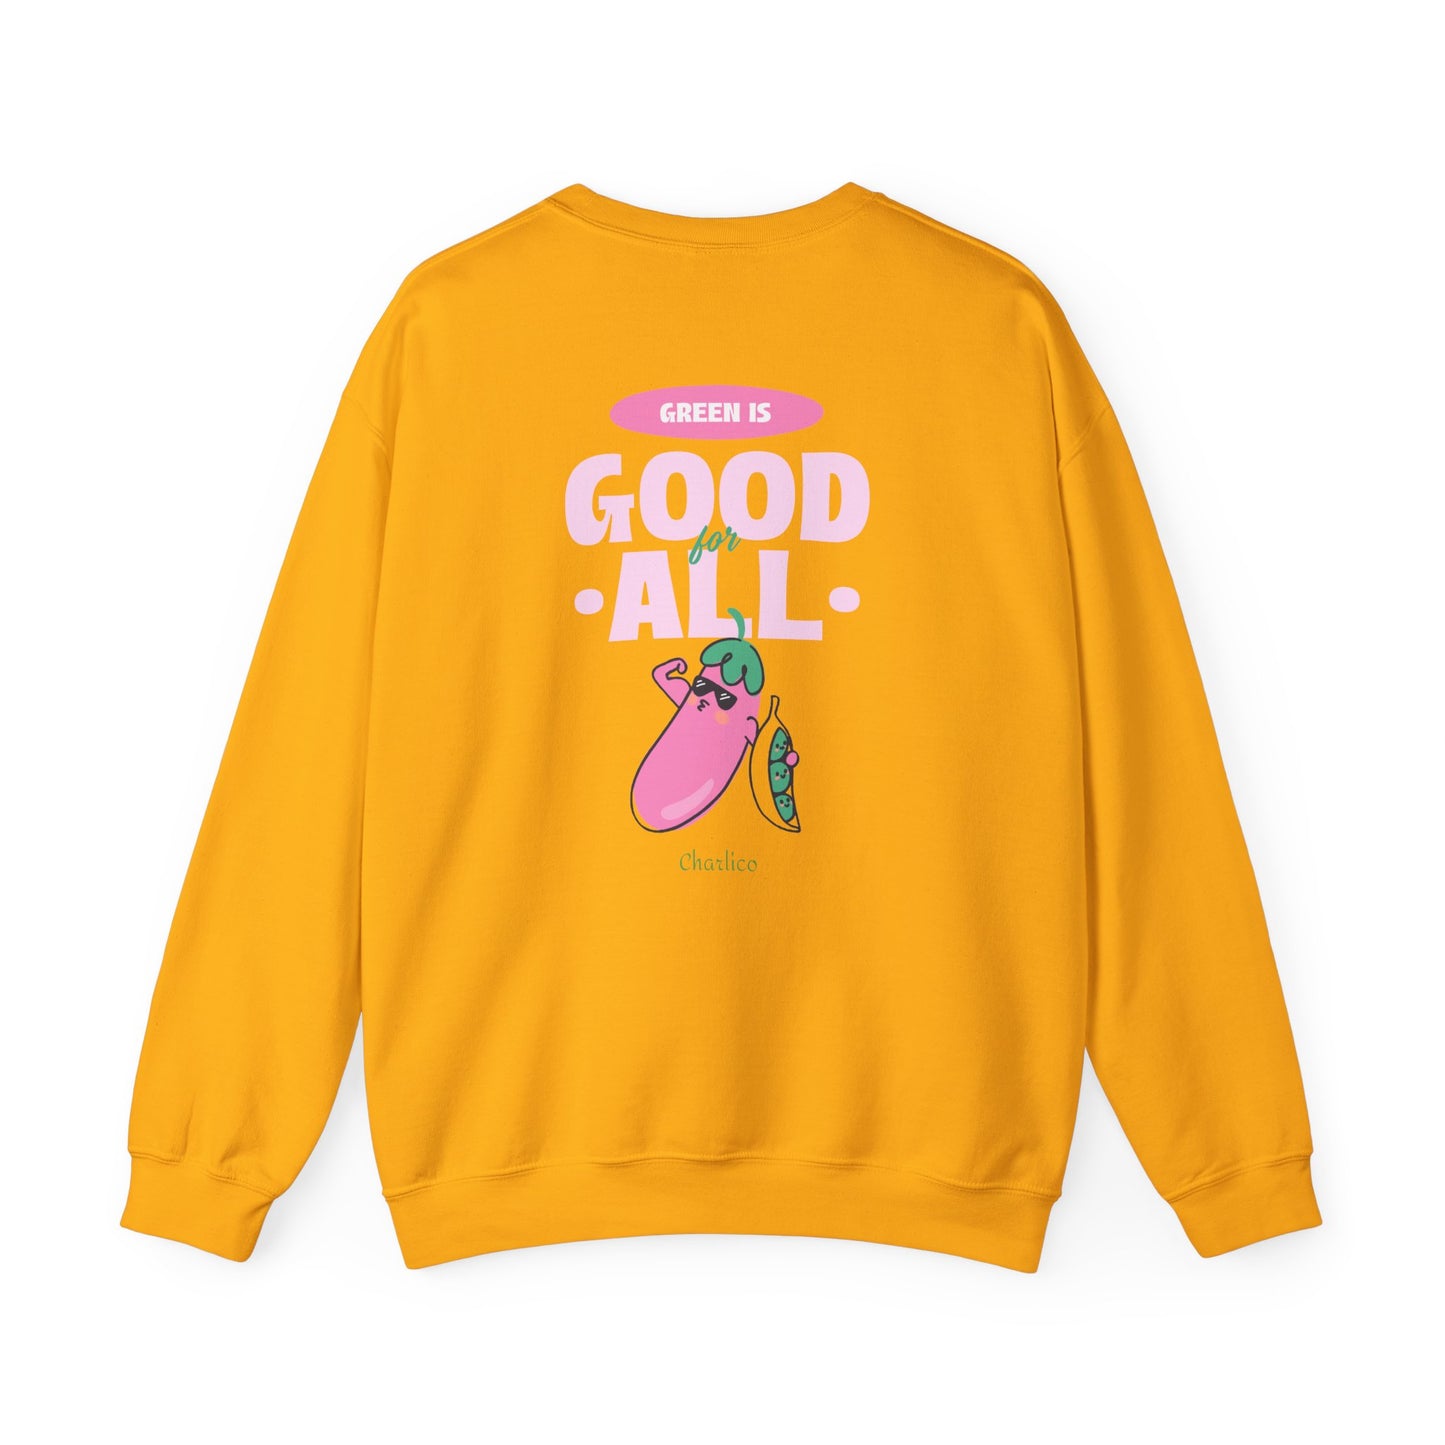 Sweatshirt crewneck -green is good for all- pour adulte